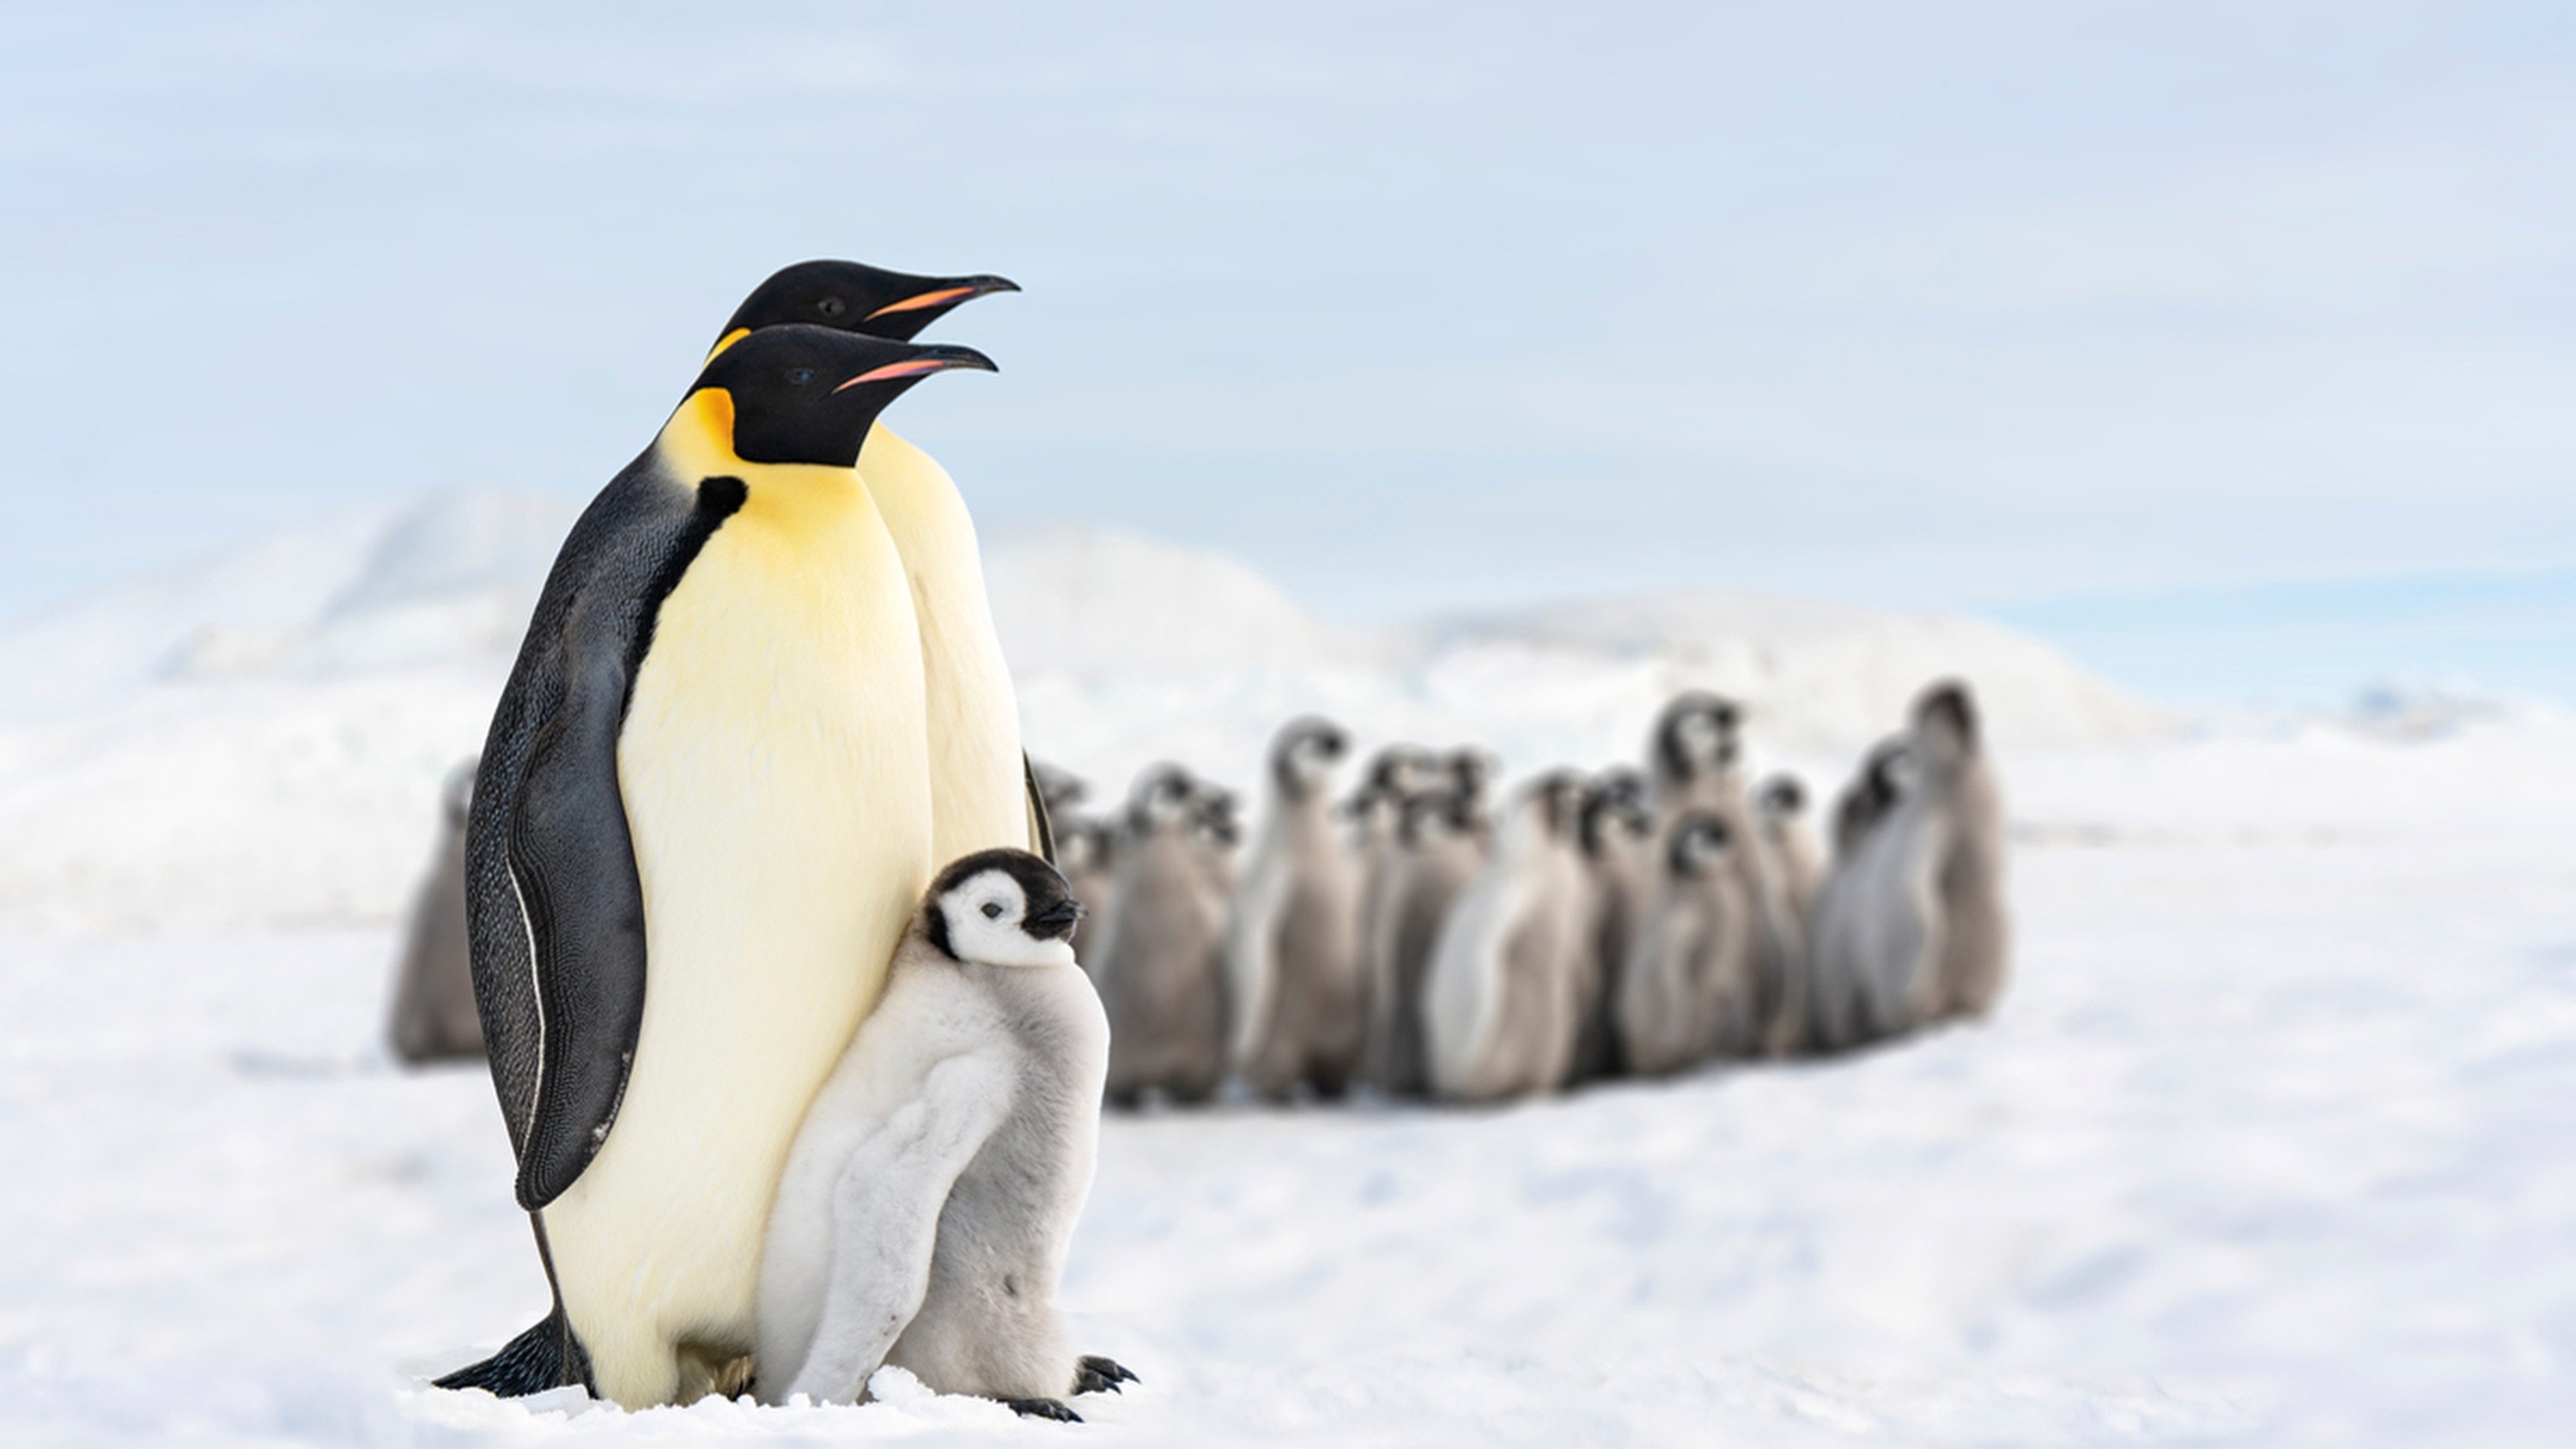 Baby emperor penguins are struggling to survive, with sea ice melting too early. Photo: Handout